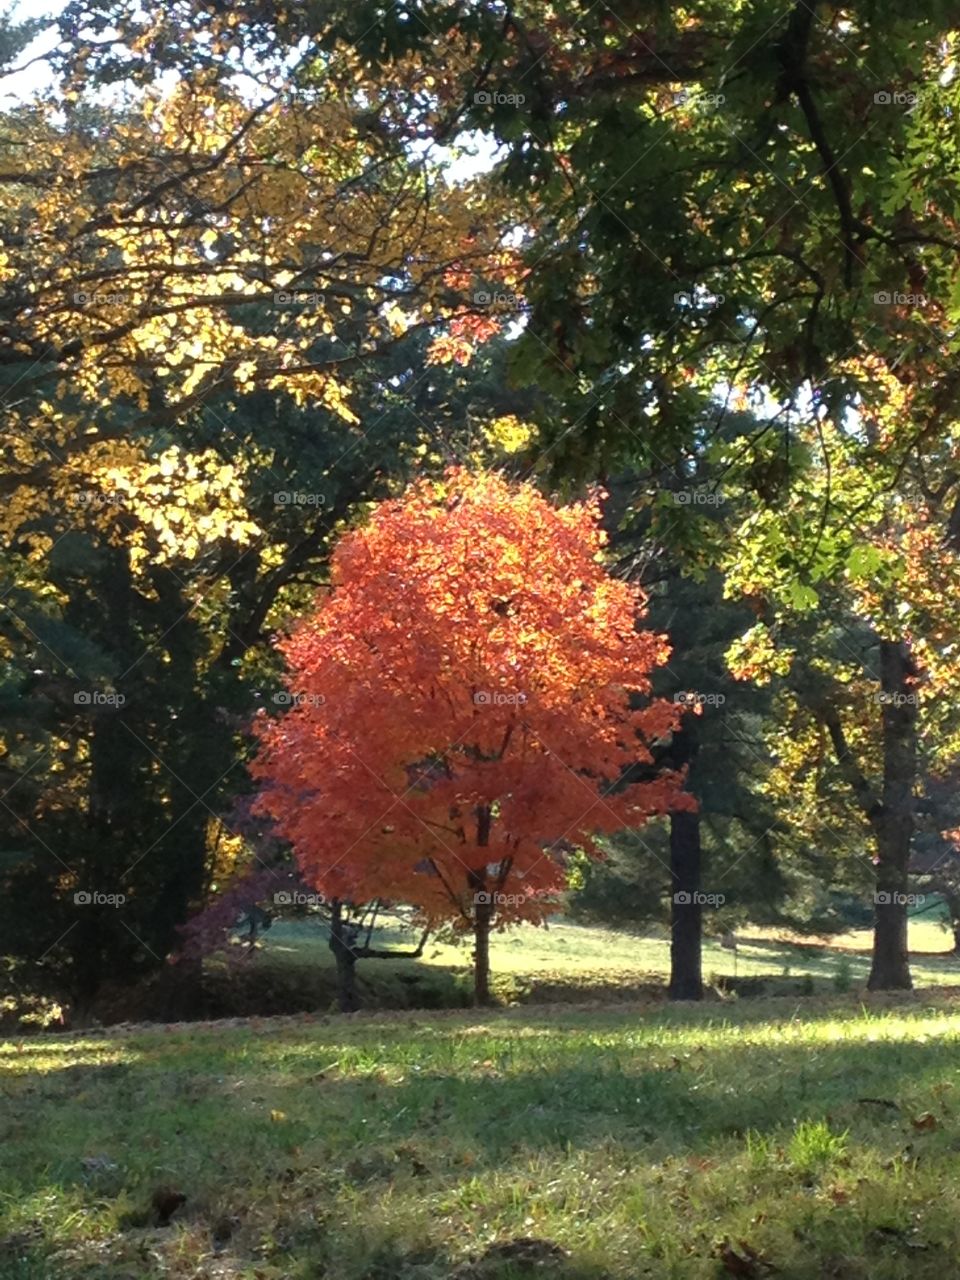 Stand Out . Full foliage in Valley Forge Park. autumn colors ablaze against a verdant background.